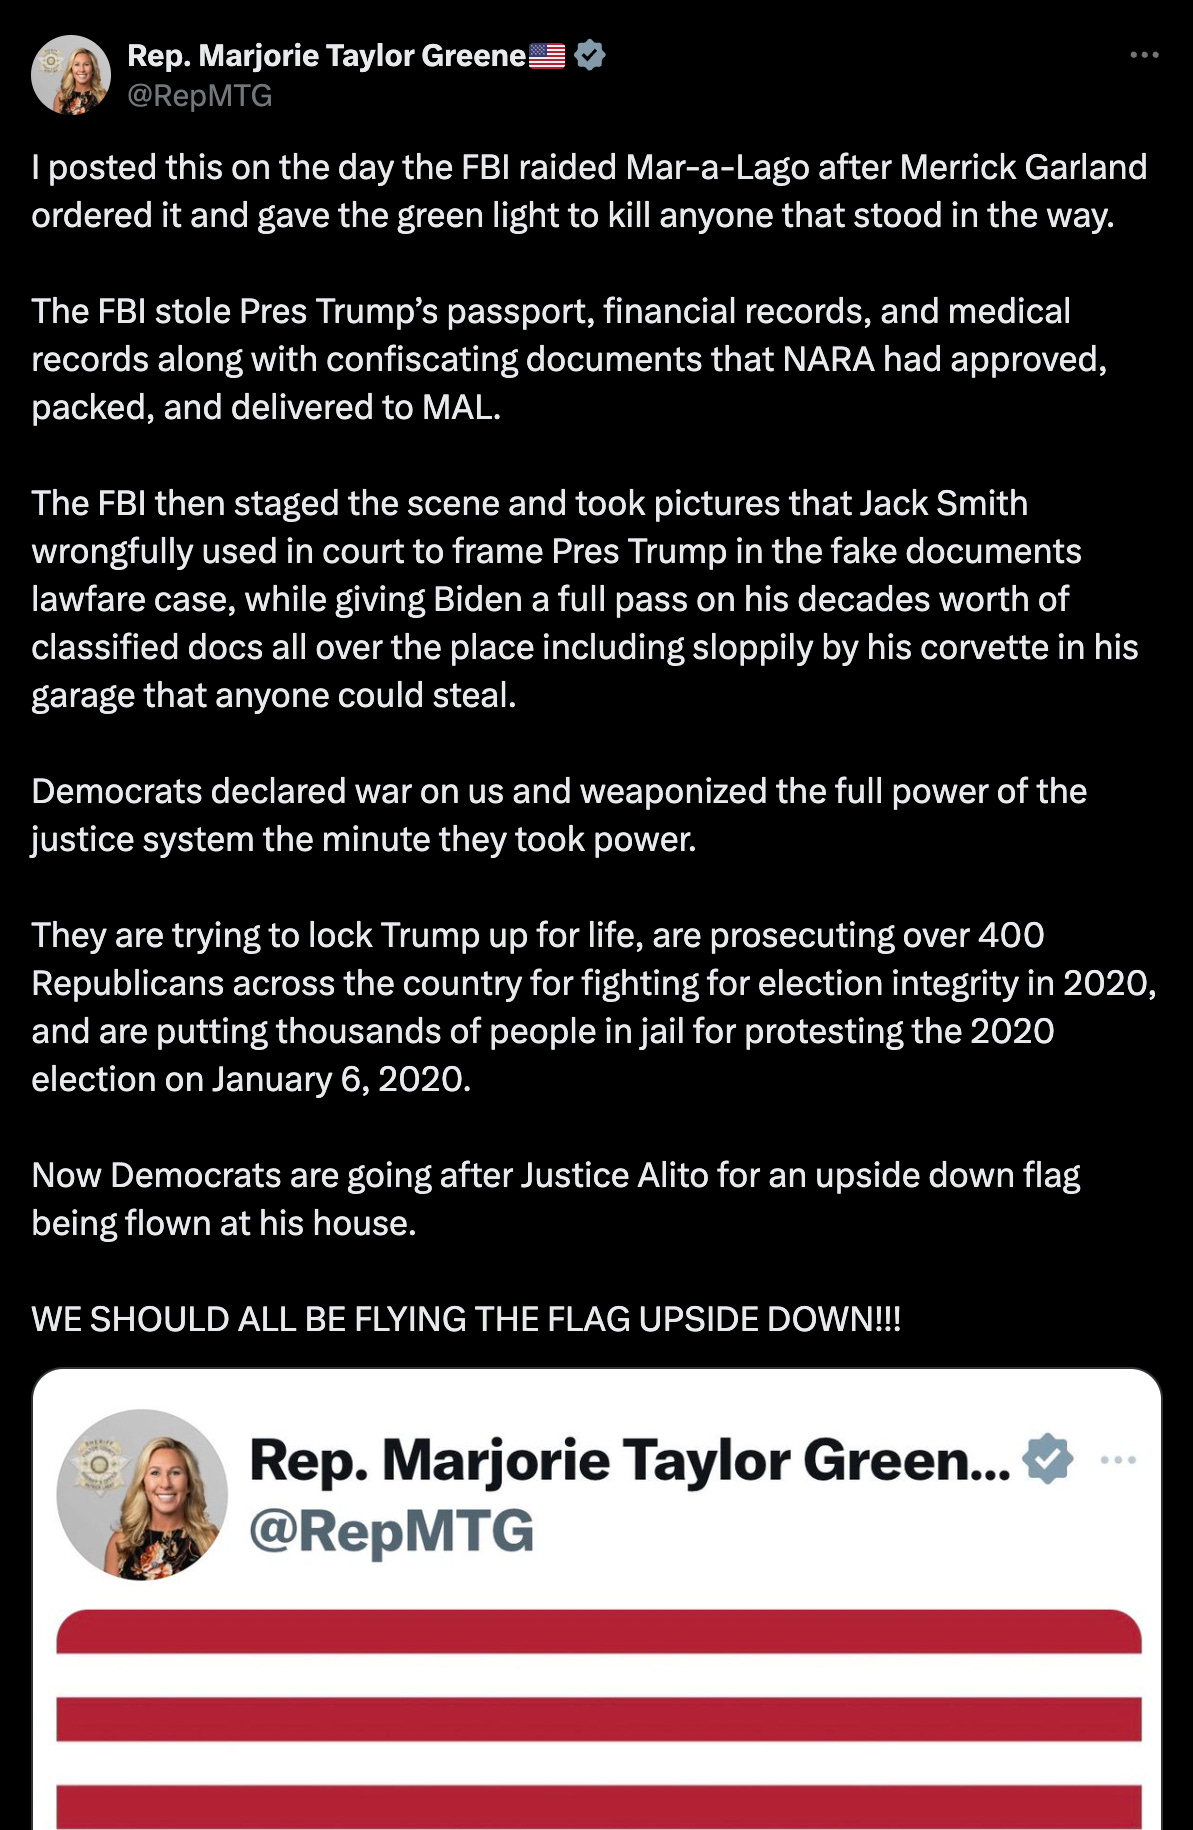 I posted this on the day the FBI raided Mar-a-Lago after Merrick Garland ordered it and gave the green light to kill anyone that stood in the way.  The FBI stole Pres Trump’s passport, financial records, and medical records along with confiscating documents that NARA had approved, packed, and delivered to MAL.   The FBI then staged the scene and took pictures that Jack Smith wrongfully used in court to frame Pres Trump in the fake documents lawfare case, while giving Biden a full pass on his decades worth of classified docs all over the place including sloppily by his corvette in his garage that anyone could steal.  Democrats declared war on us and weaponized the full power of the justice system the minute they took power.  They are trying to lock Trump up for life, are prosecuting over 400 Republicans across the country for fighting for election integrity in 2020, and are putting thousands of people in jail for protesting the 2020 election on January 6, 2020.   Now Democrats are going after Justice Alito for an upside down flag being flown at his house.  WE SHOULD ALL BE FLYING THE FLAG UPSIDE DOWN!!!